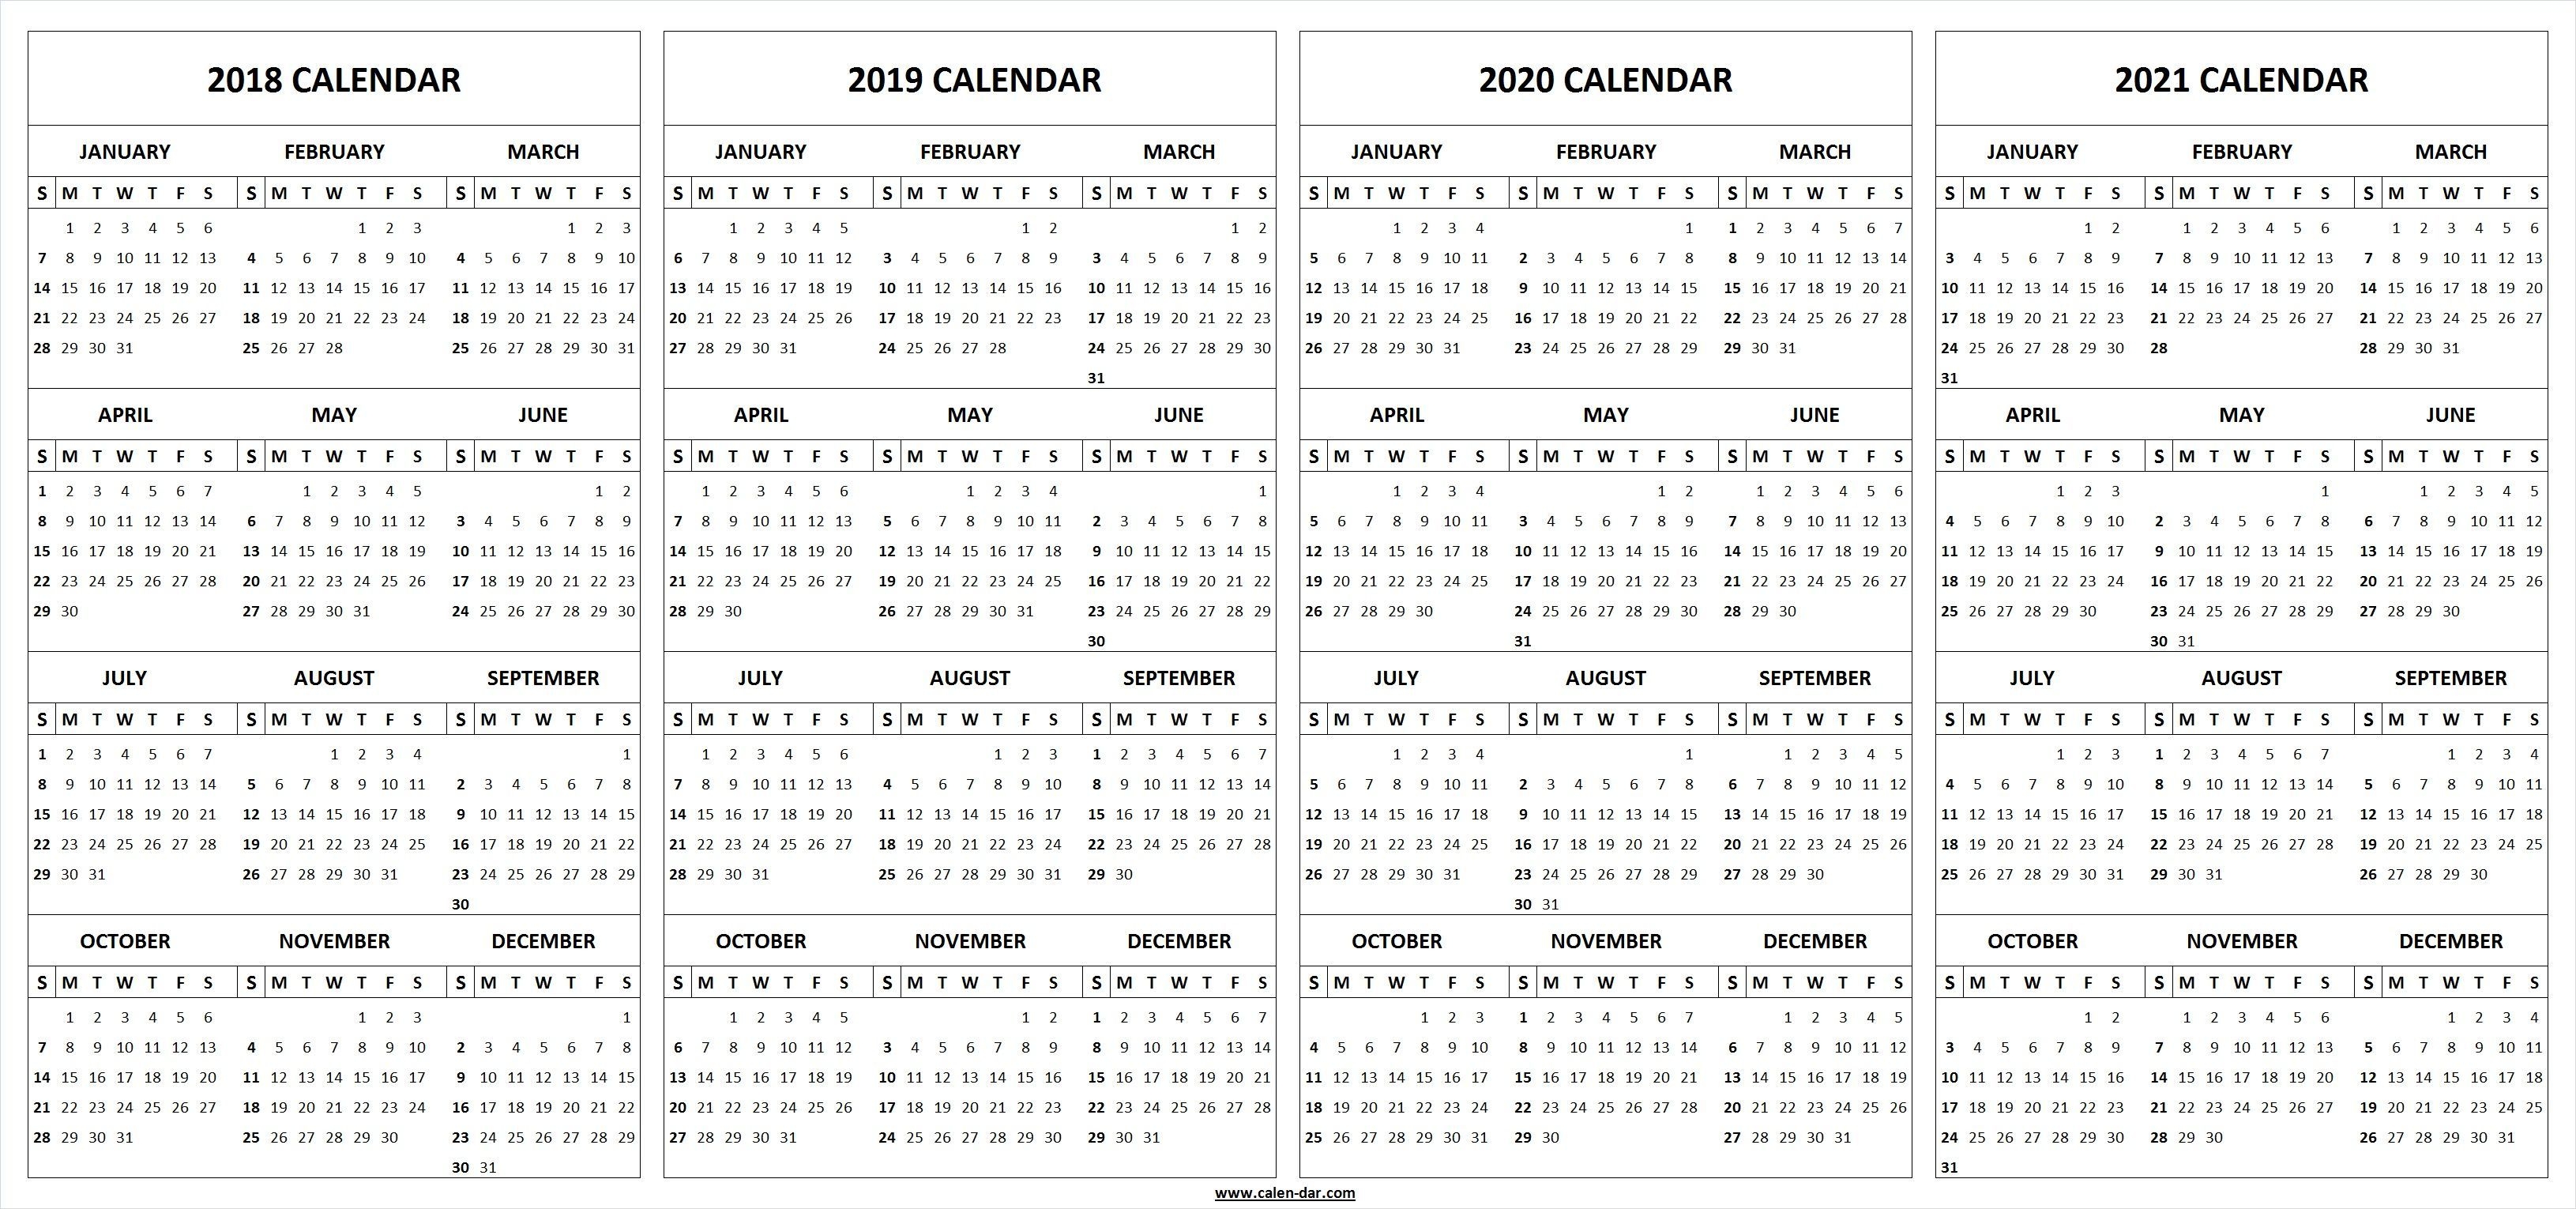 Printable 2018 2019 2020 2021 Calendar Template (With Images